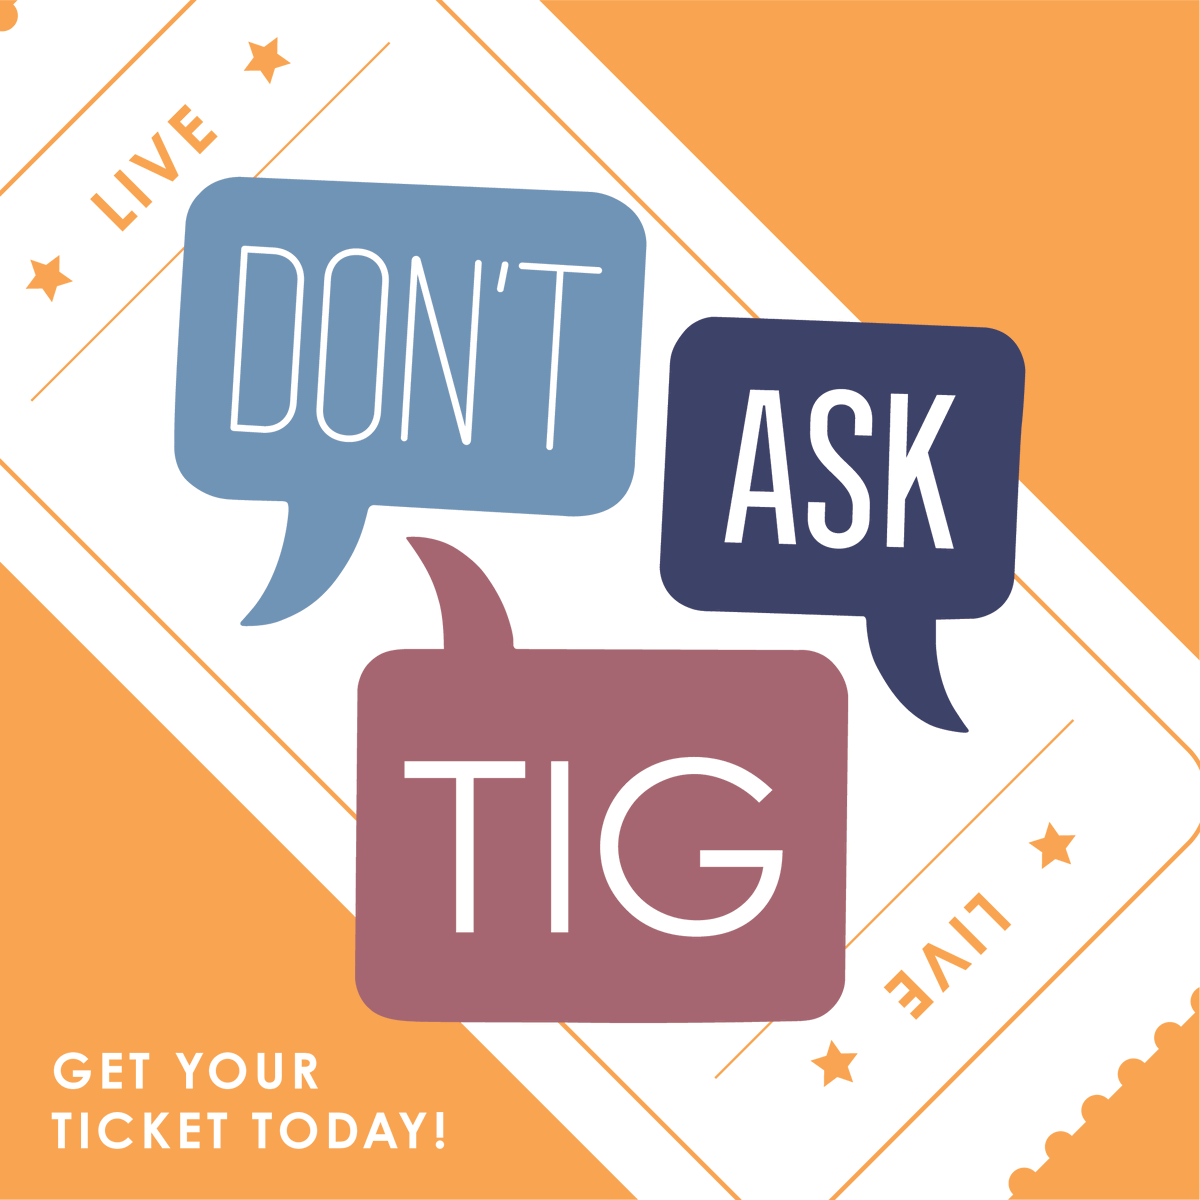 ⏰Just a few hours left to get your ticket for tonight’s LIVE Don’t Ask Tig with @marcmaron & @TigNotaro! Can’t attend in real-time? Don’t worry! The show will be recorded and available to ticket holders for viewing after the event. Tickets 🎟🎟🎟: support.americanpublicmedia.org/dontasktig-eve…